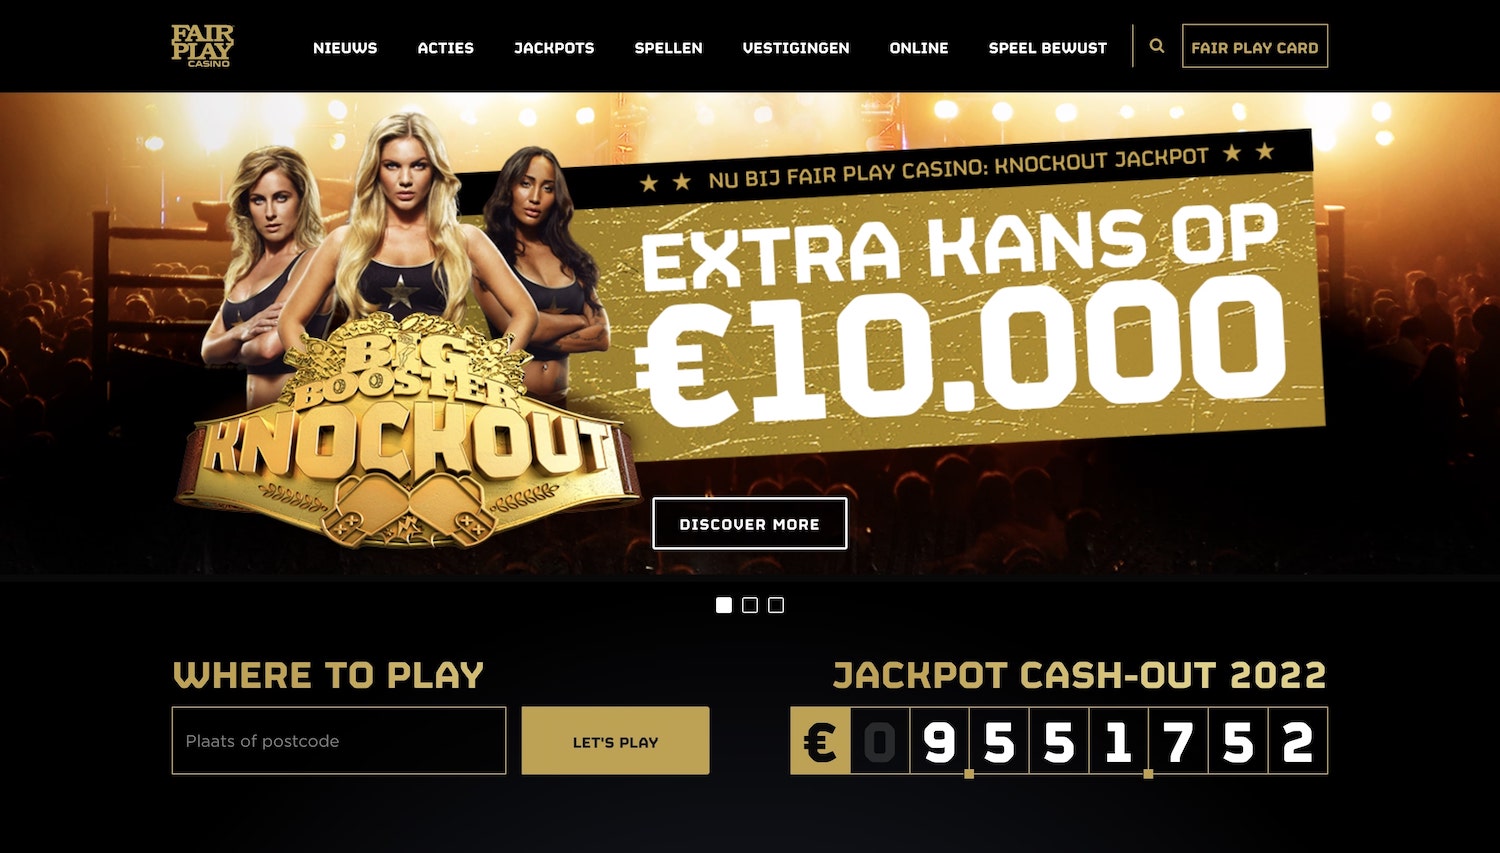 Official website of the Fair Play Casino